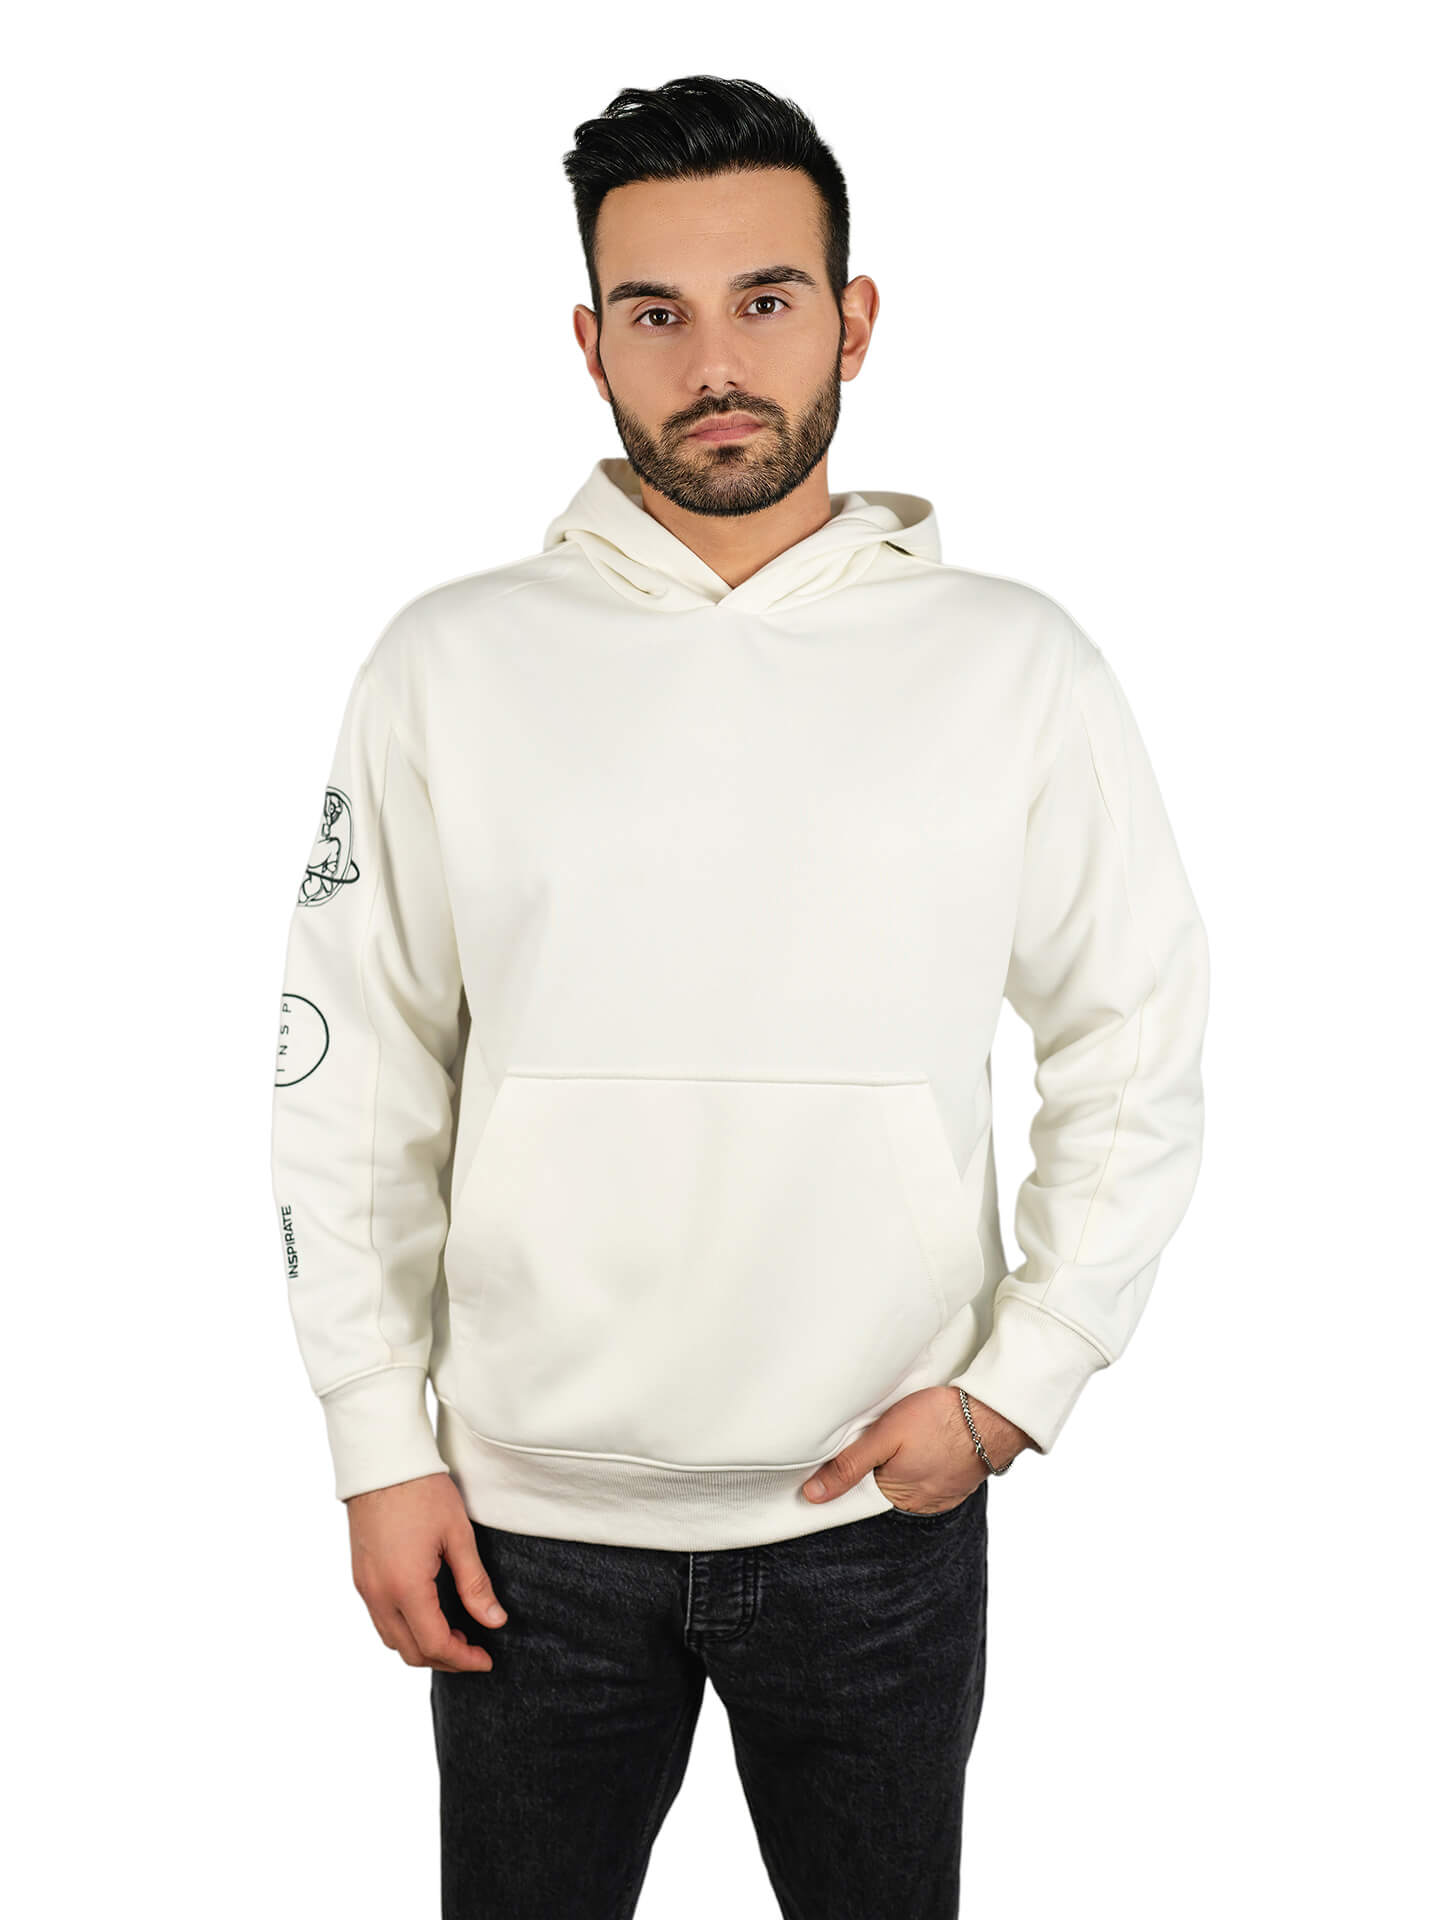 Normans Inspirate INSP Graphic Sleeve Hoodie